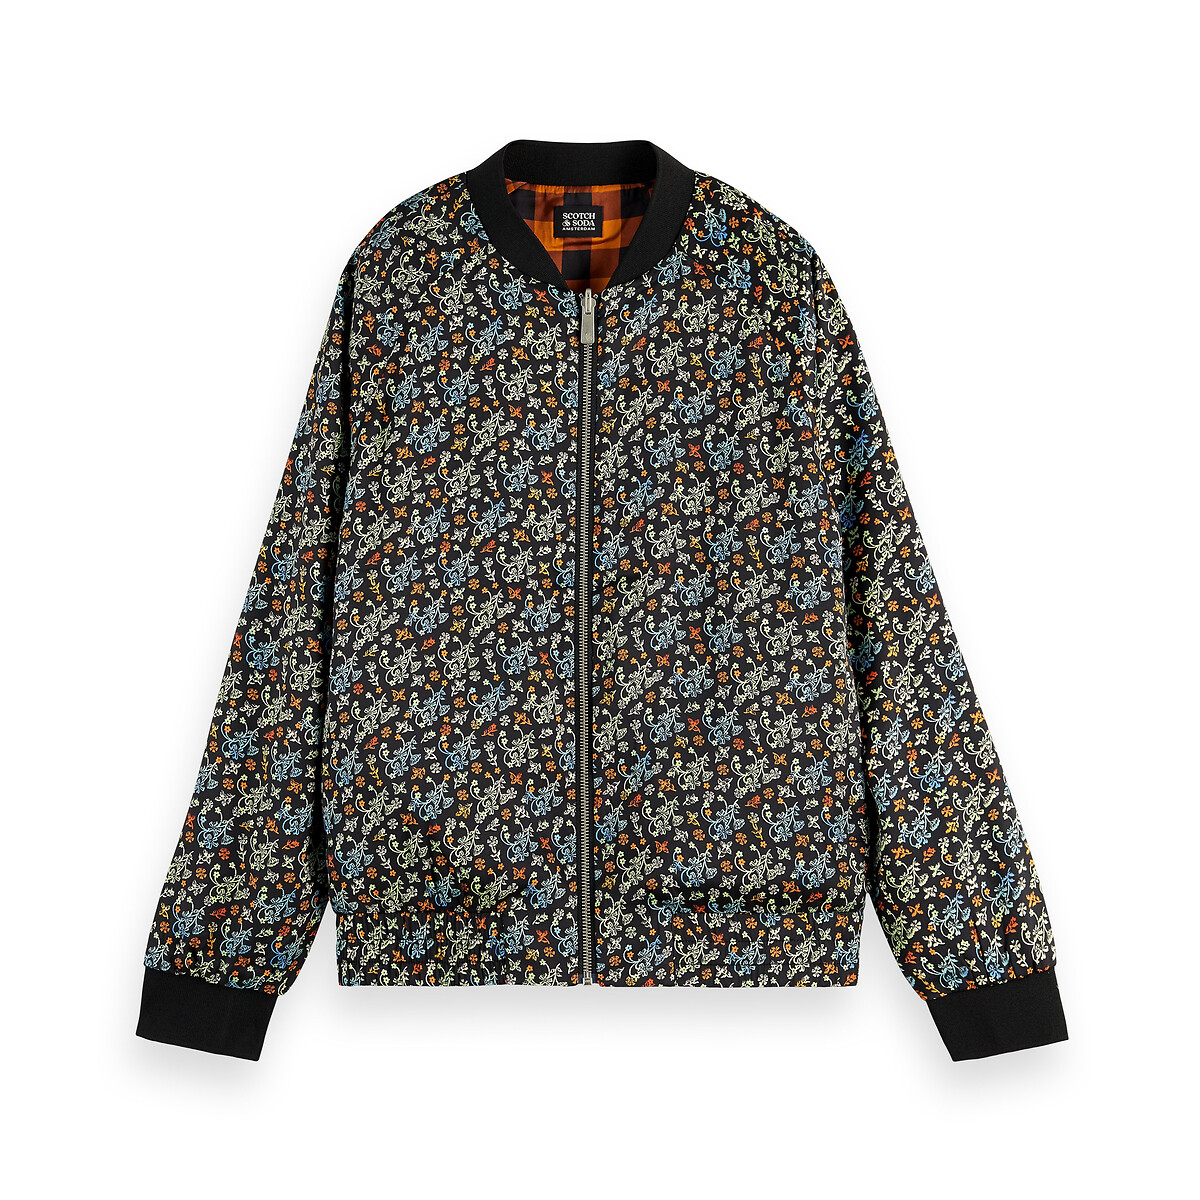 Scotch & Soda Boys Reversible Jacket with Contrast Check Parts 